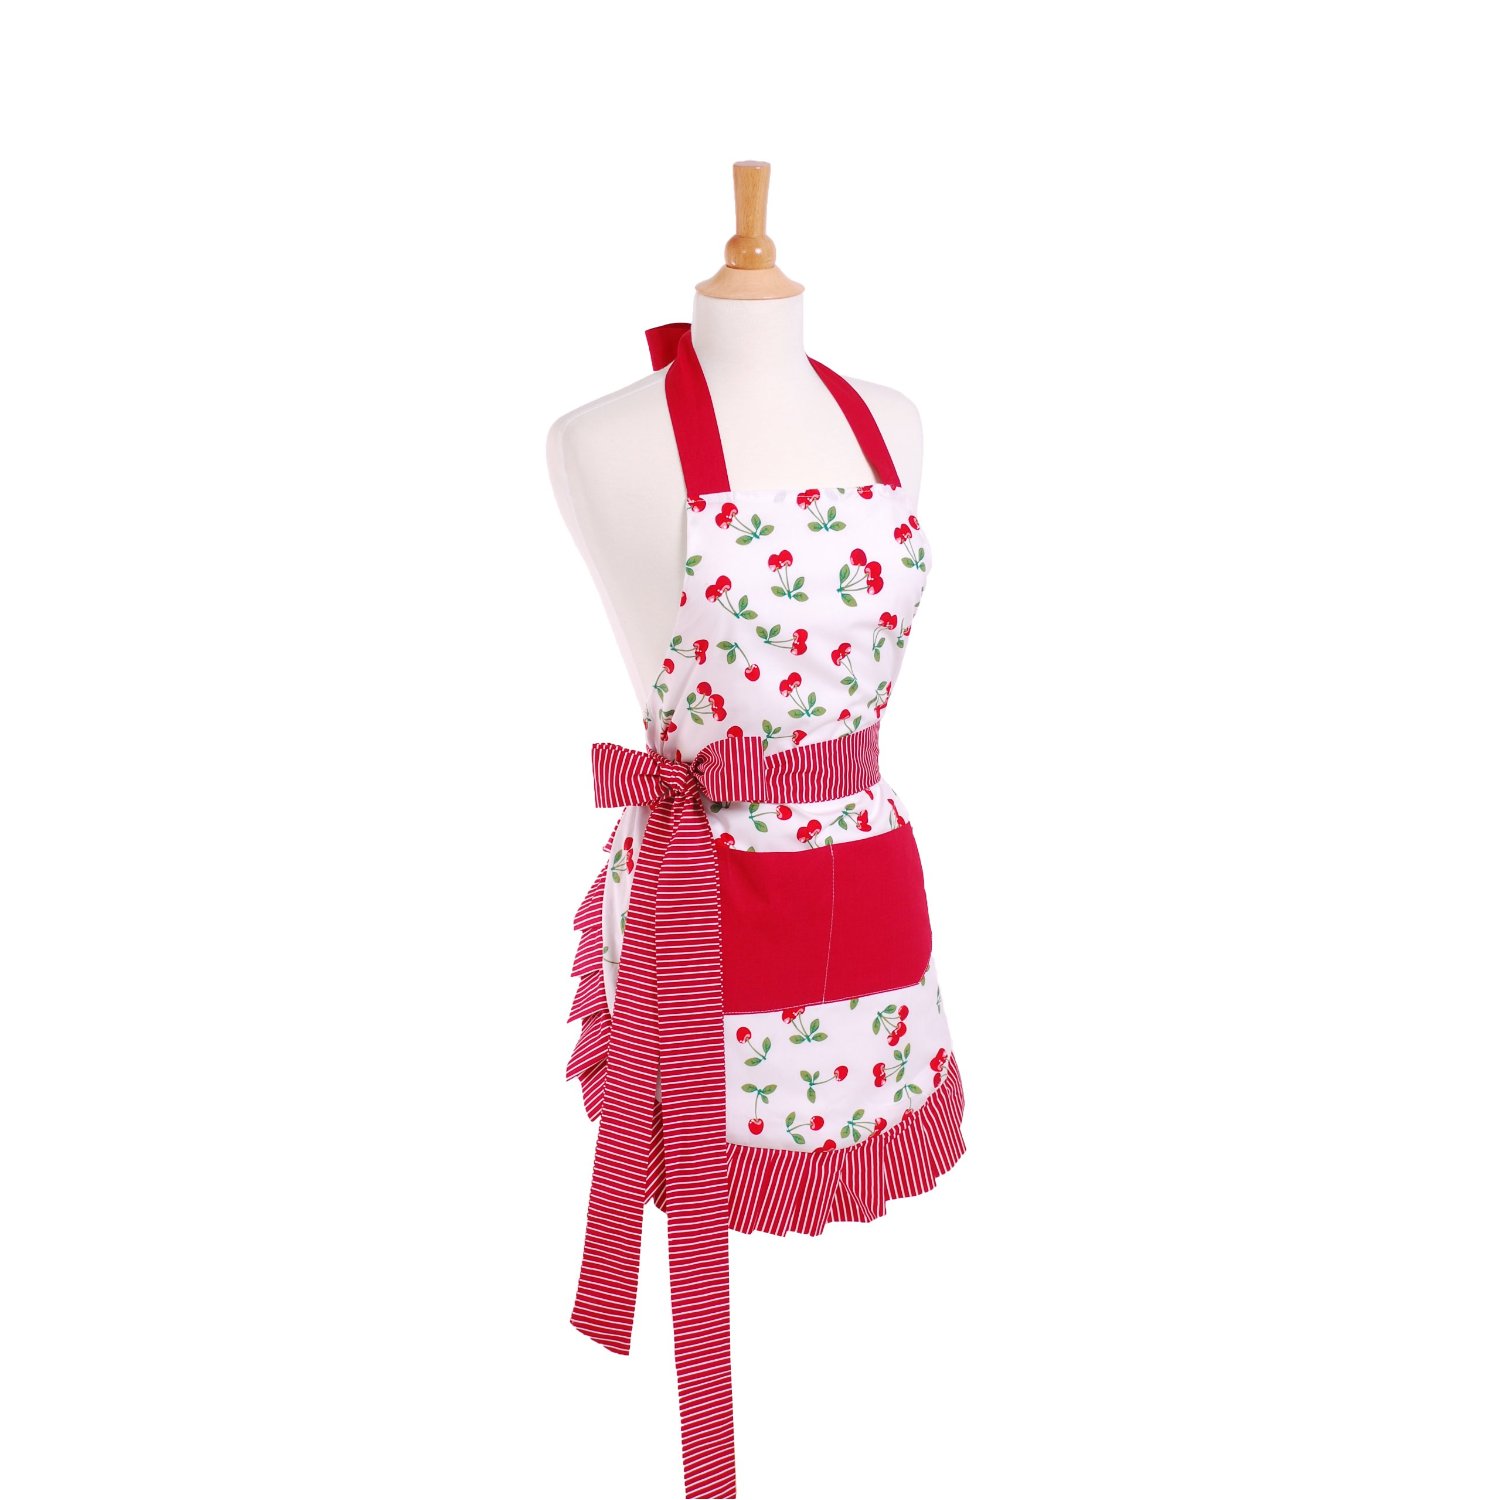 White & Red Vintage style cherry apron with red bow and cute ruffle